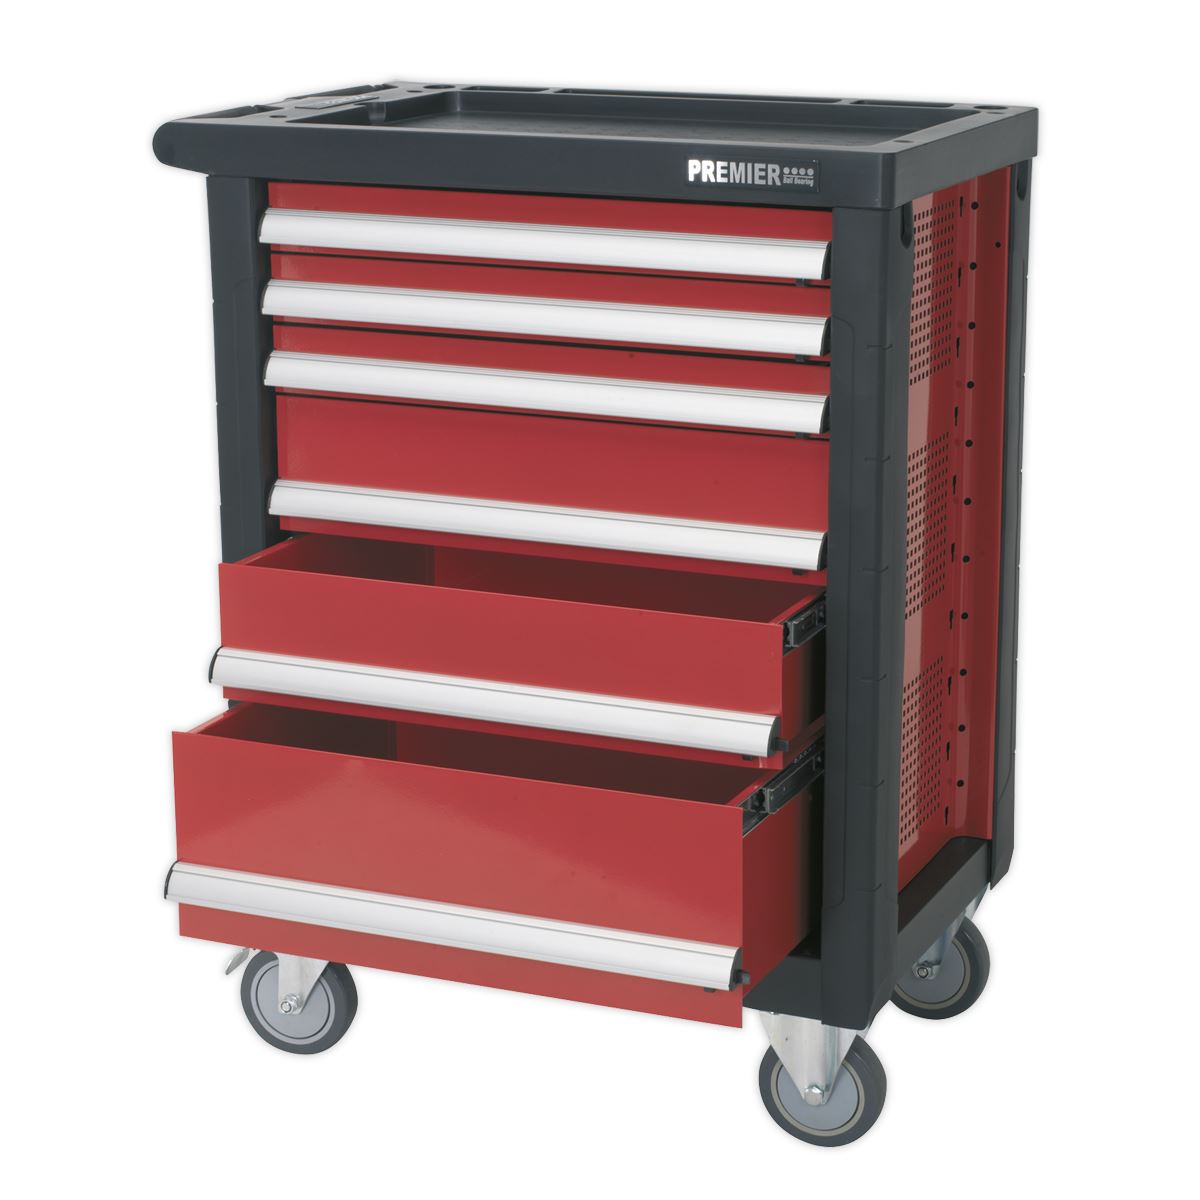 Sealey Premier Rollcab 6 Drawer with Ball-Bearing Slides